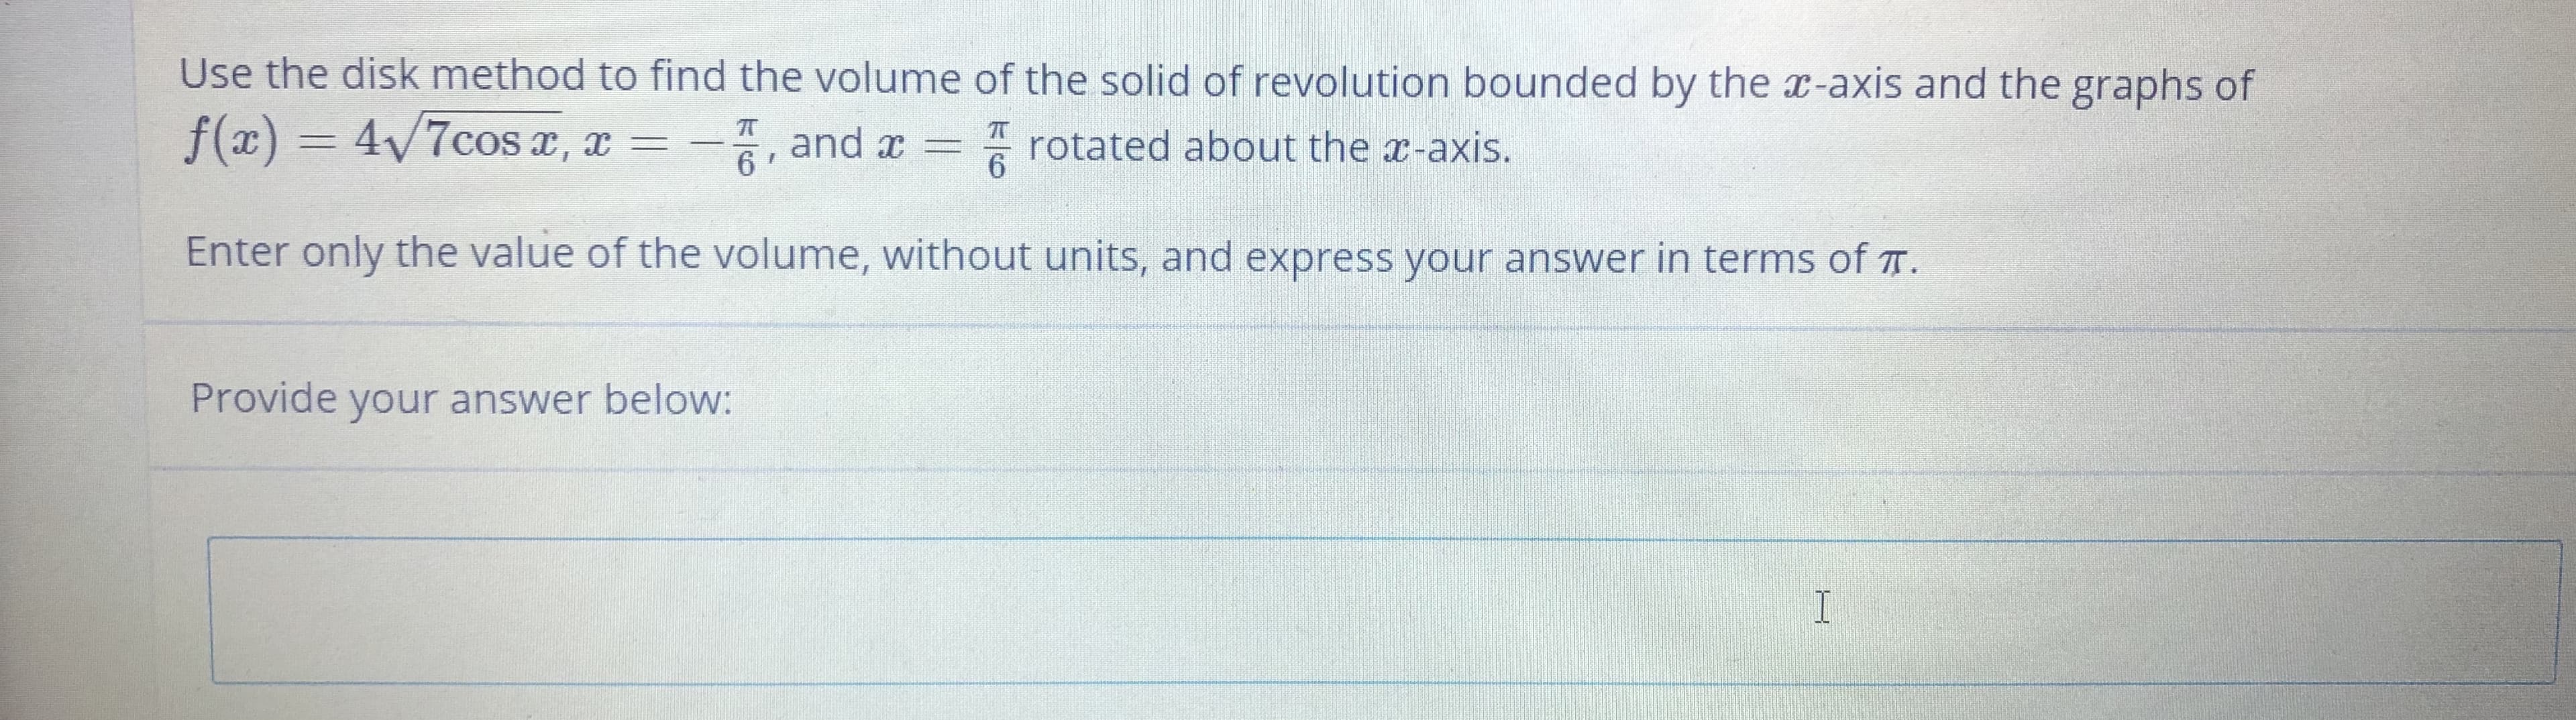 Use the disk method to find the volume of the solid of revolution bounded by the x-axis and the graphs of
f(x) = 4/7cos e, x = –
and x =
6
rotated about the x-axis.
6.
Enter only the value of the volume, without units, and express your answer in terms of T.
